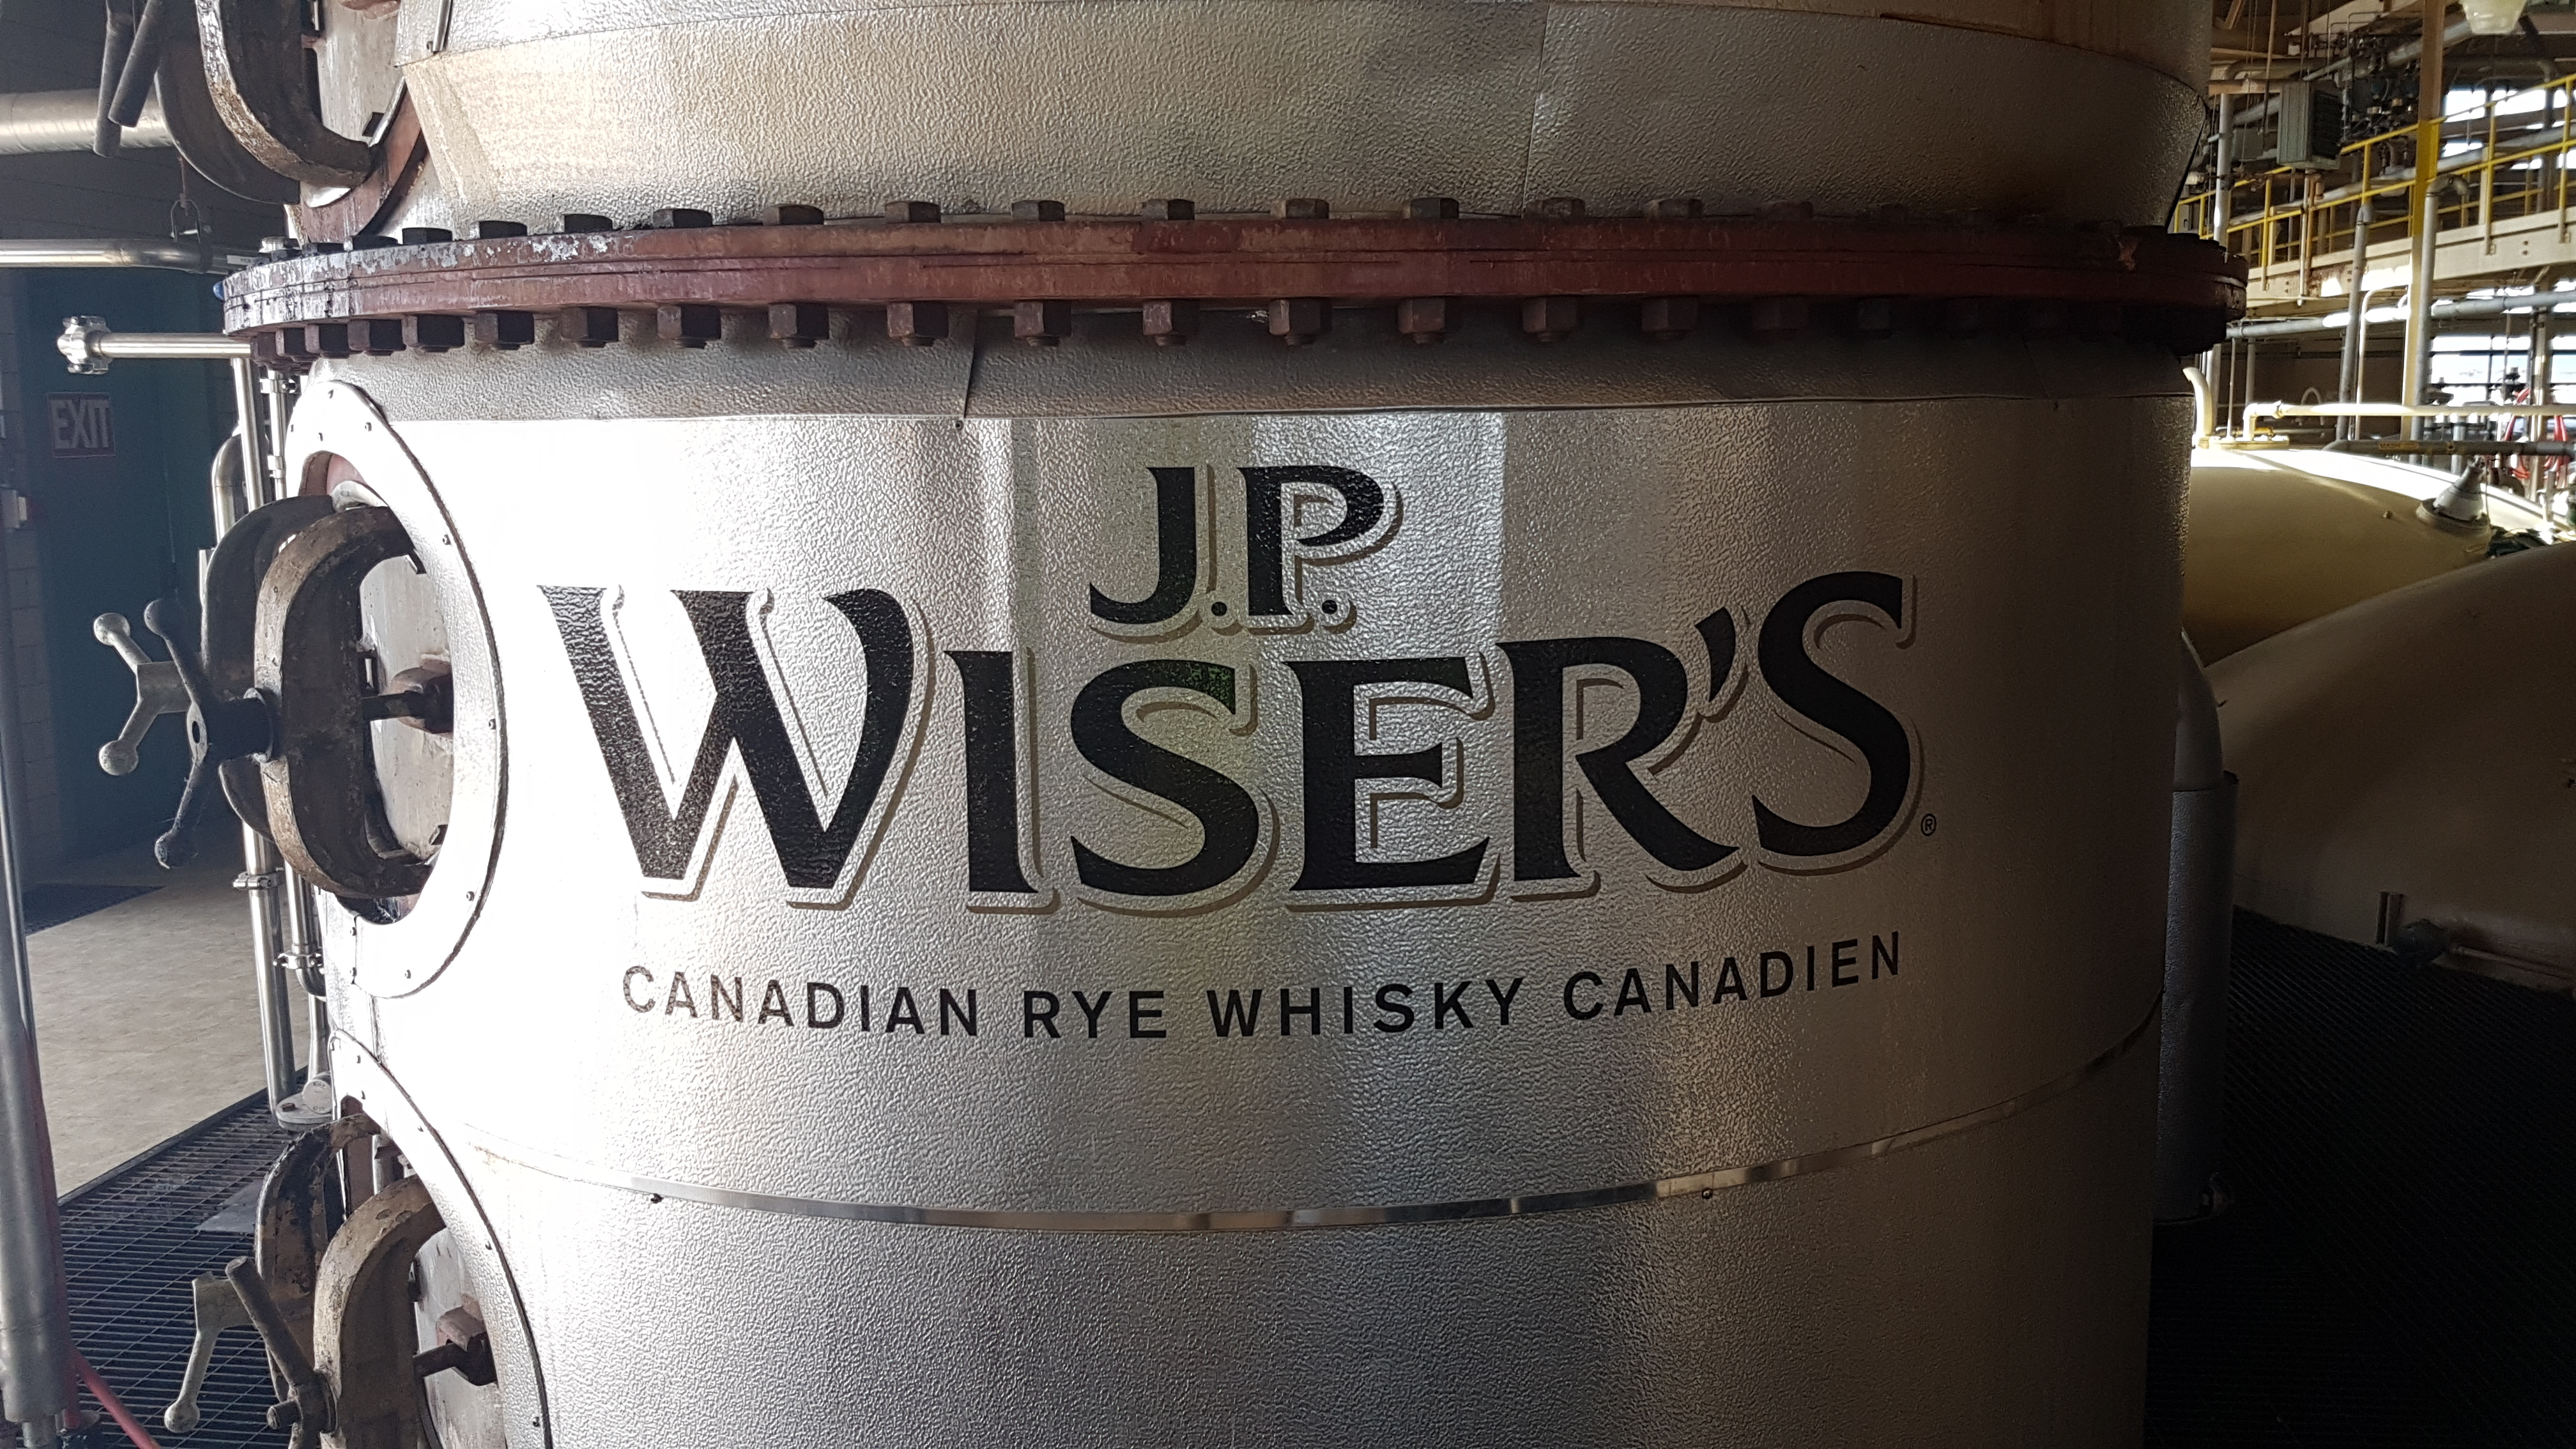 The Hiram Walker & Sons distillery, home to J.P. Wiser's, was named Distillery of the Year at the Canadian Whisky Awards.